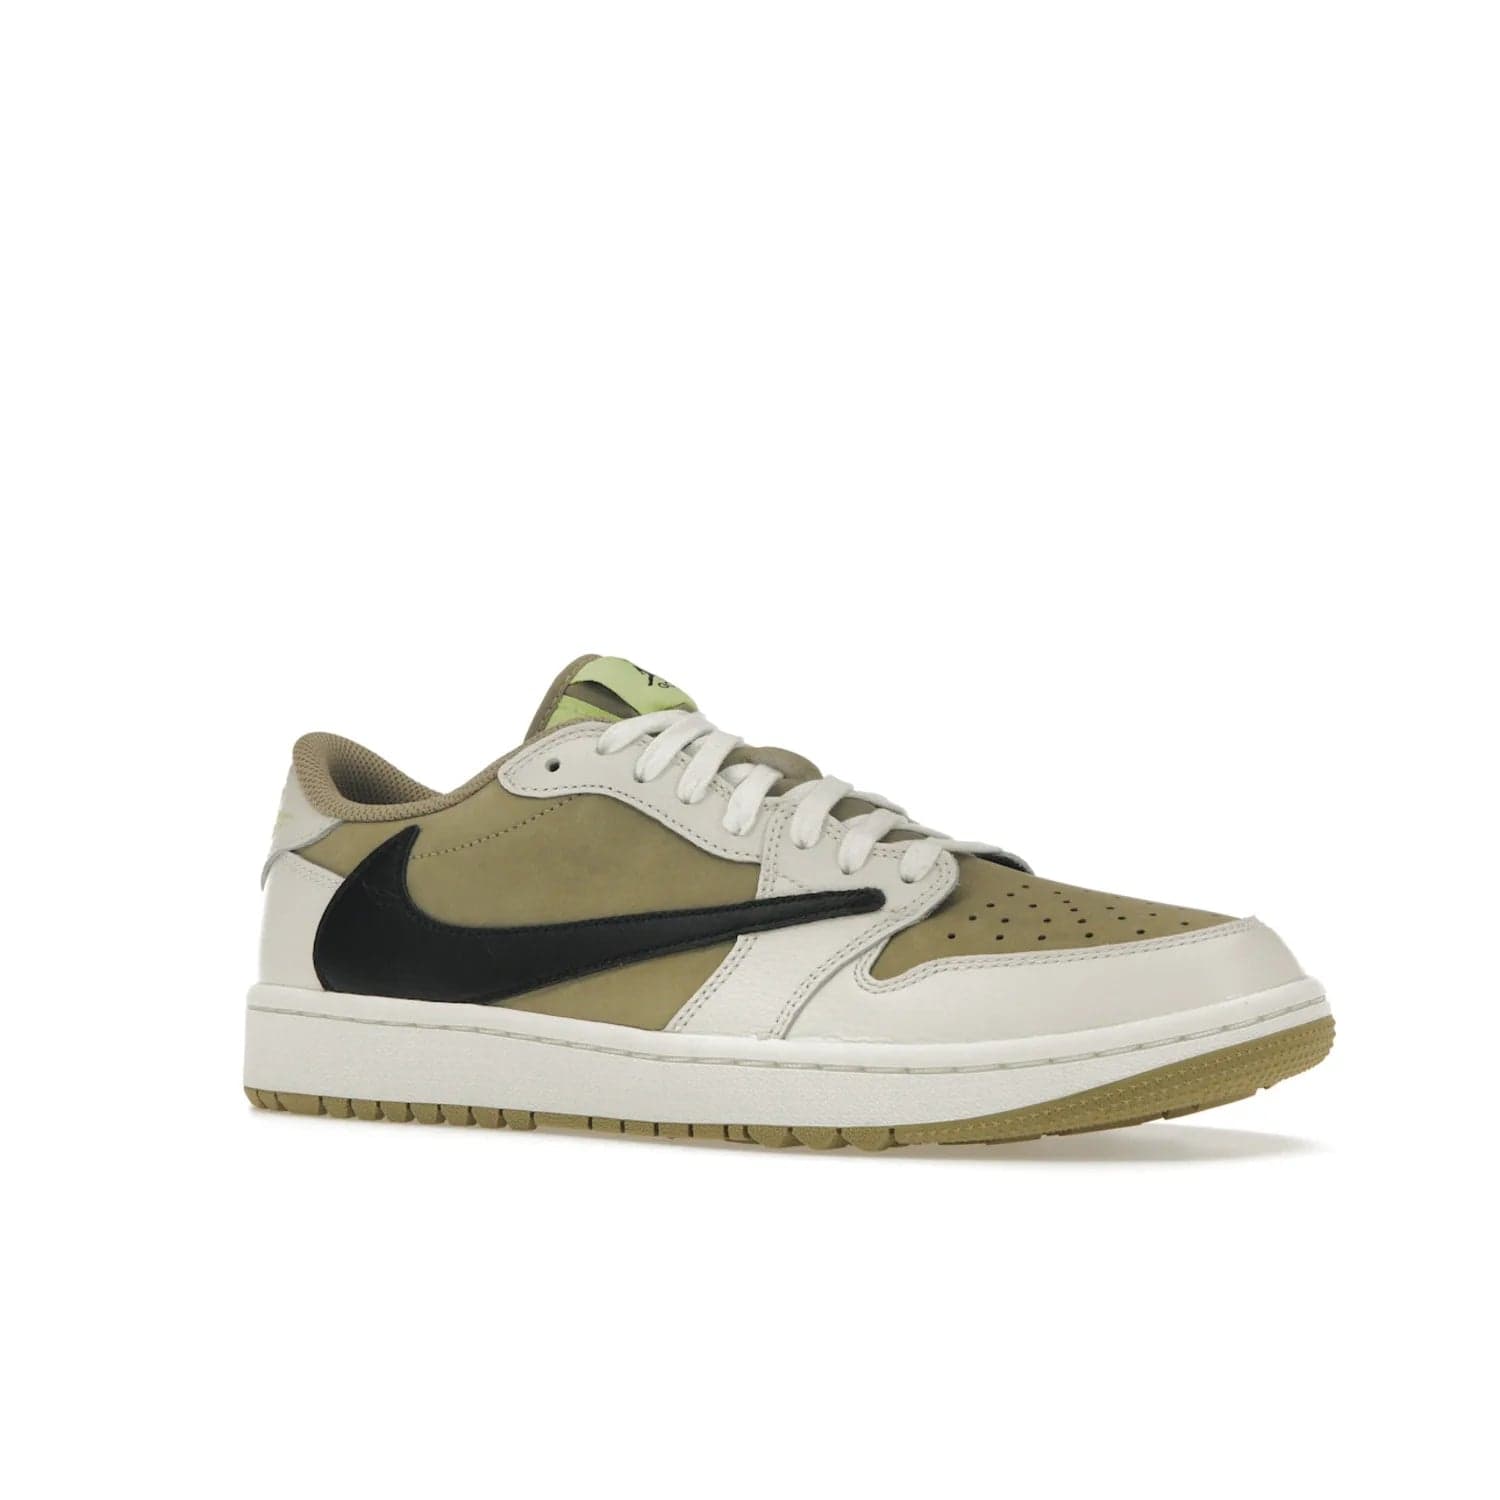 Jordan 1 Retro Low Golf Travis Scott Neutral Olive - Image 4 - Only at www.BallersClubKickz.com - Explore the unique Jordan 1 Retro Low Golf Travis Scott Neutral Olive, an olive-green sneaker collaboration between the iconic Jordan Brand and music royalty, Travis Scott. This special pair is tailored for the golf course with altered traction, hardened rubber, and a sleek style perfect for everyday wear. Get your pair and impress the crowd with its signature earth tones.